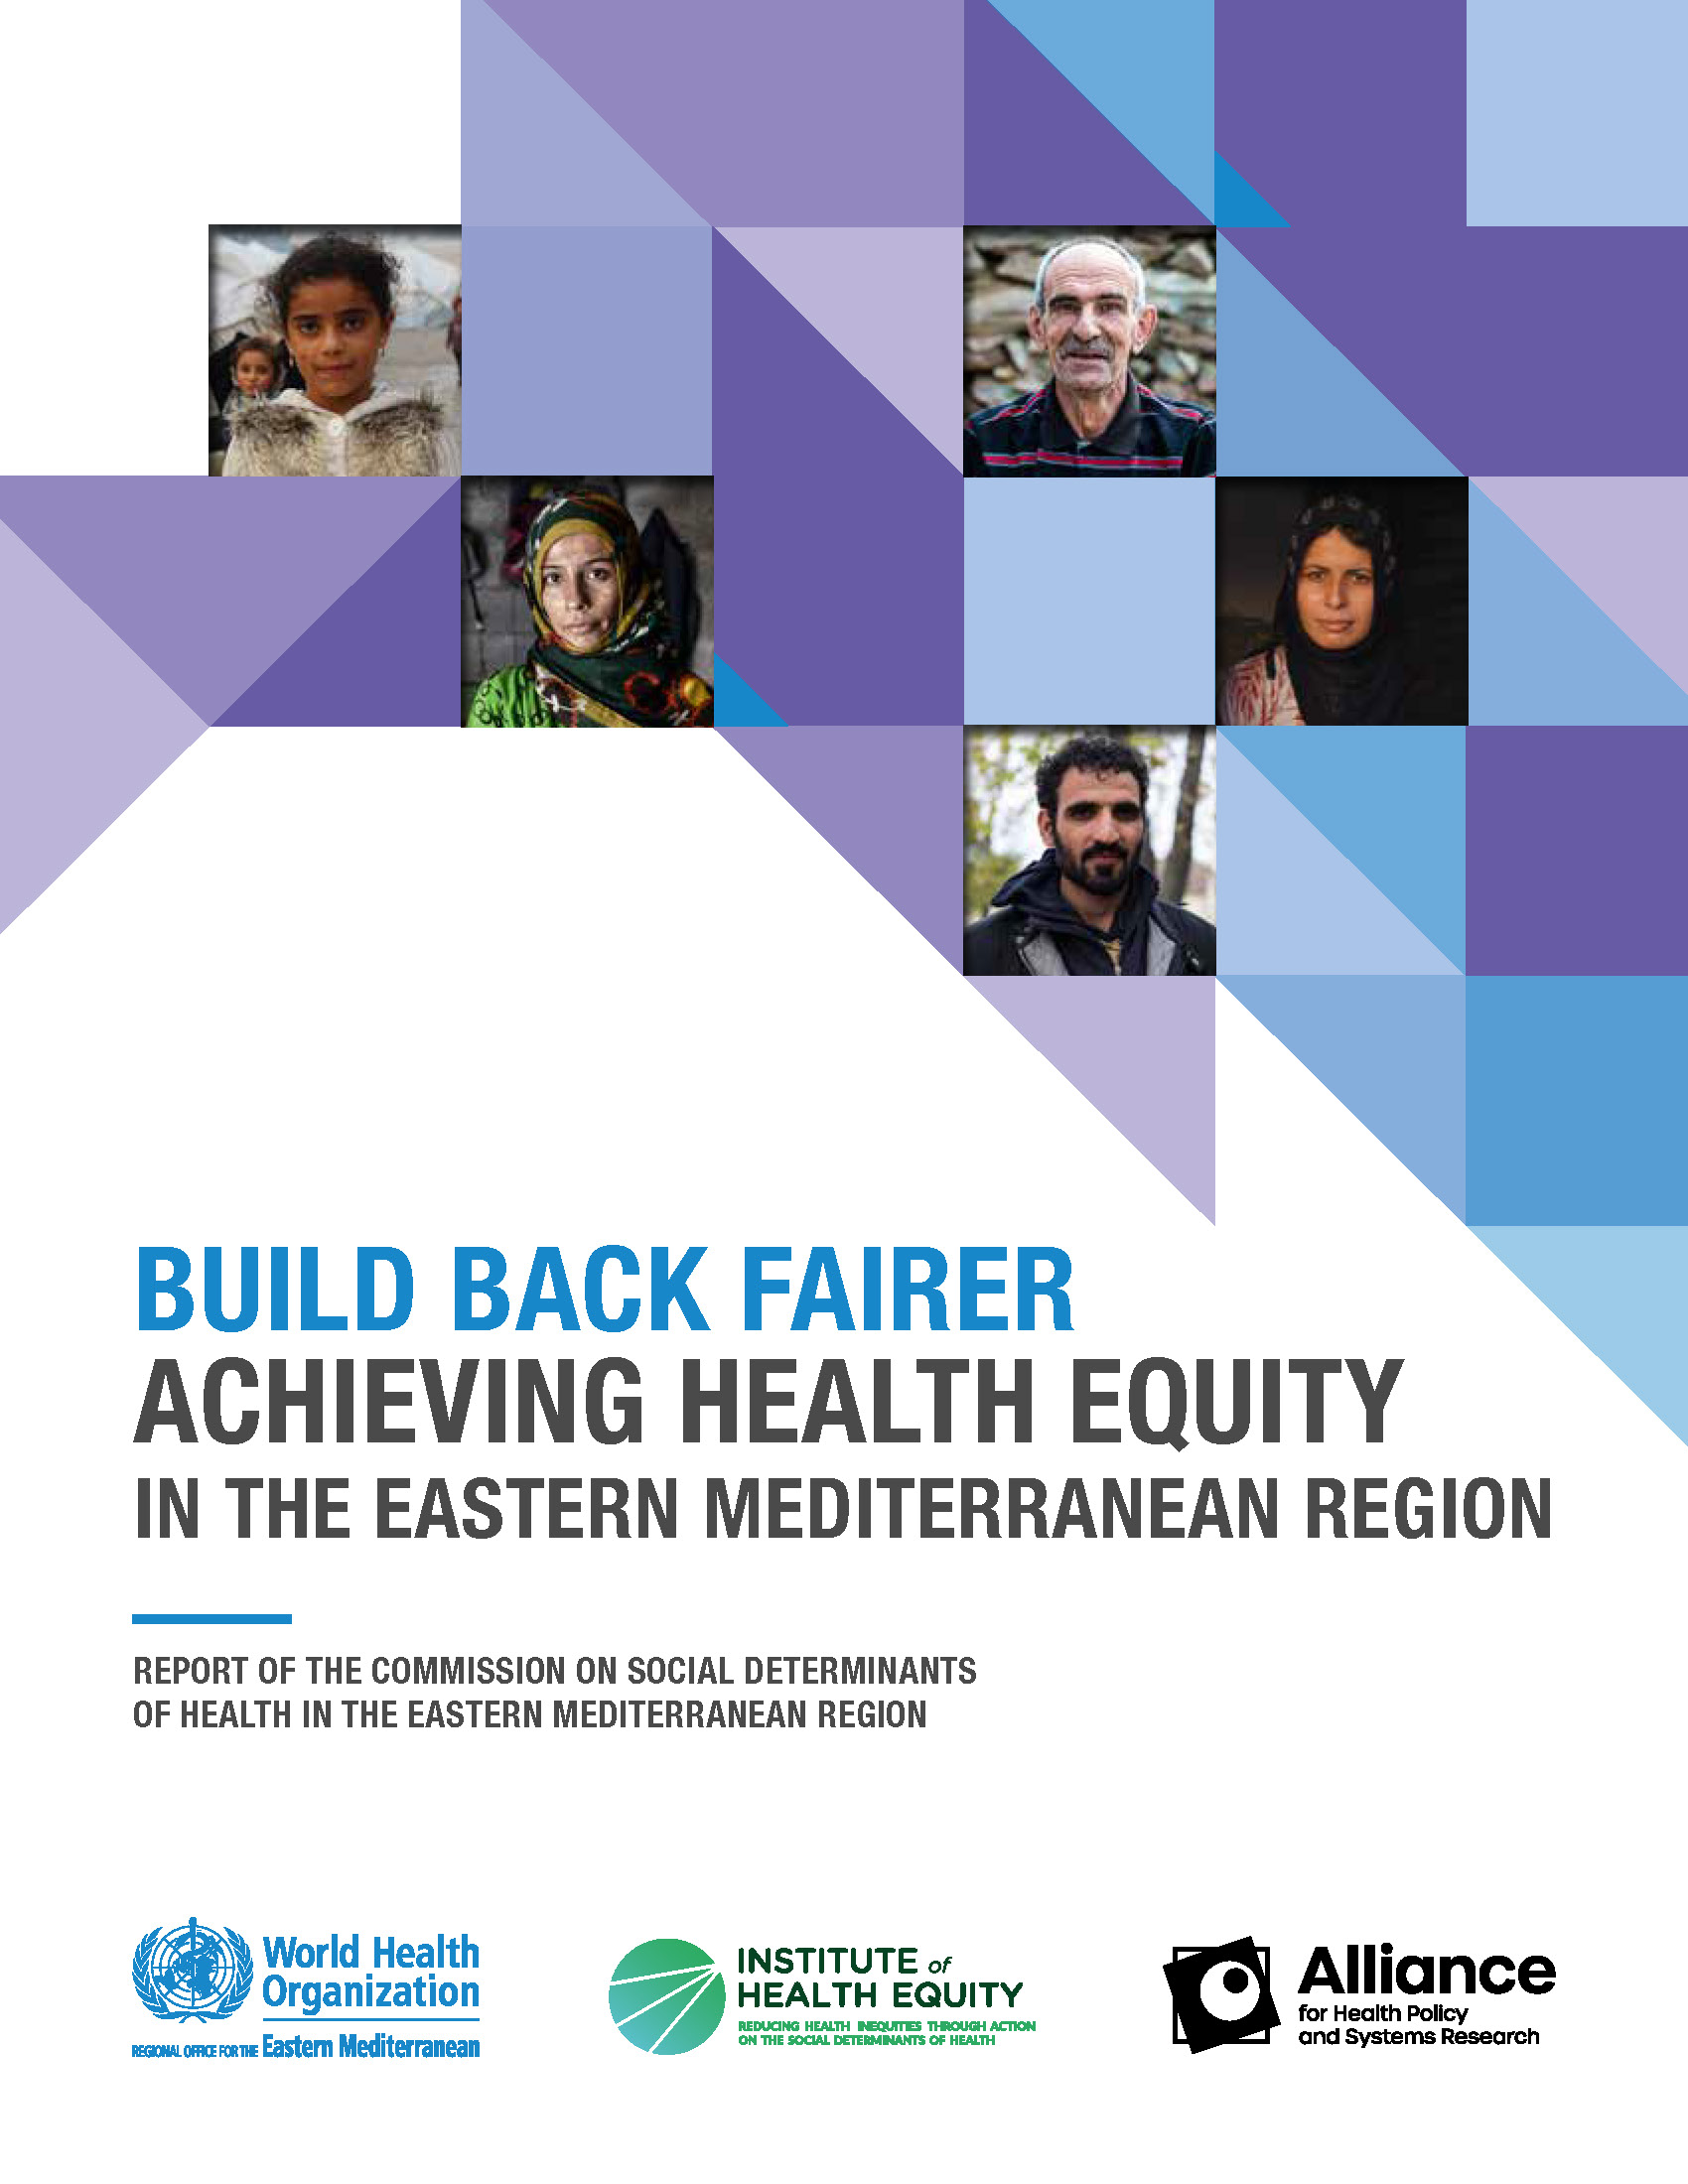 Build back fairer: achieving health equity in the Eastern Mediterranean Region: report of the commission on social determinants of health in the Eastern Mediterranean Region